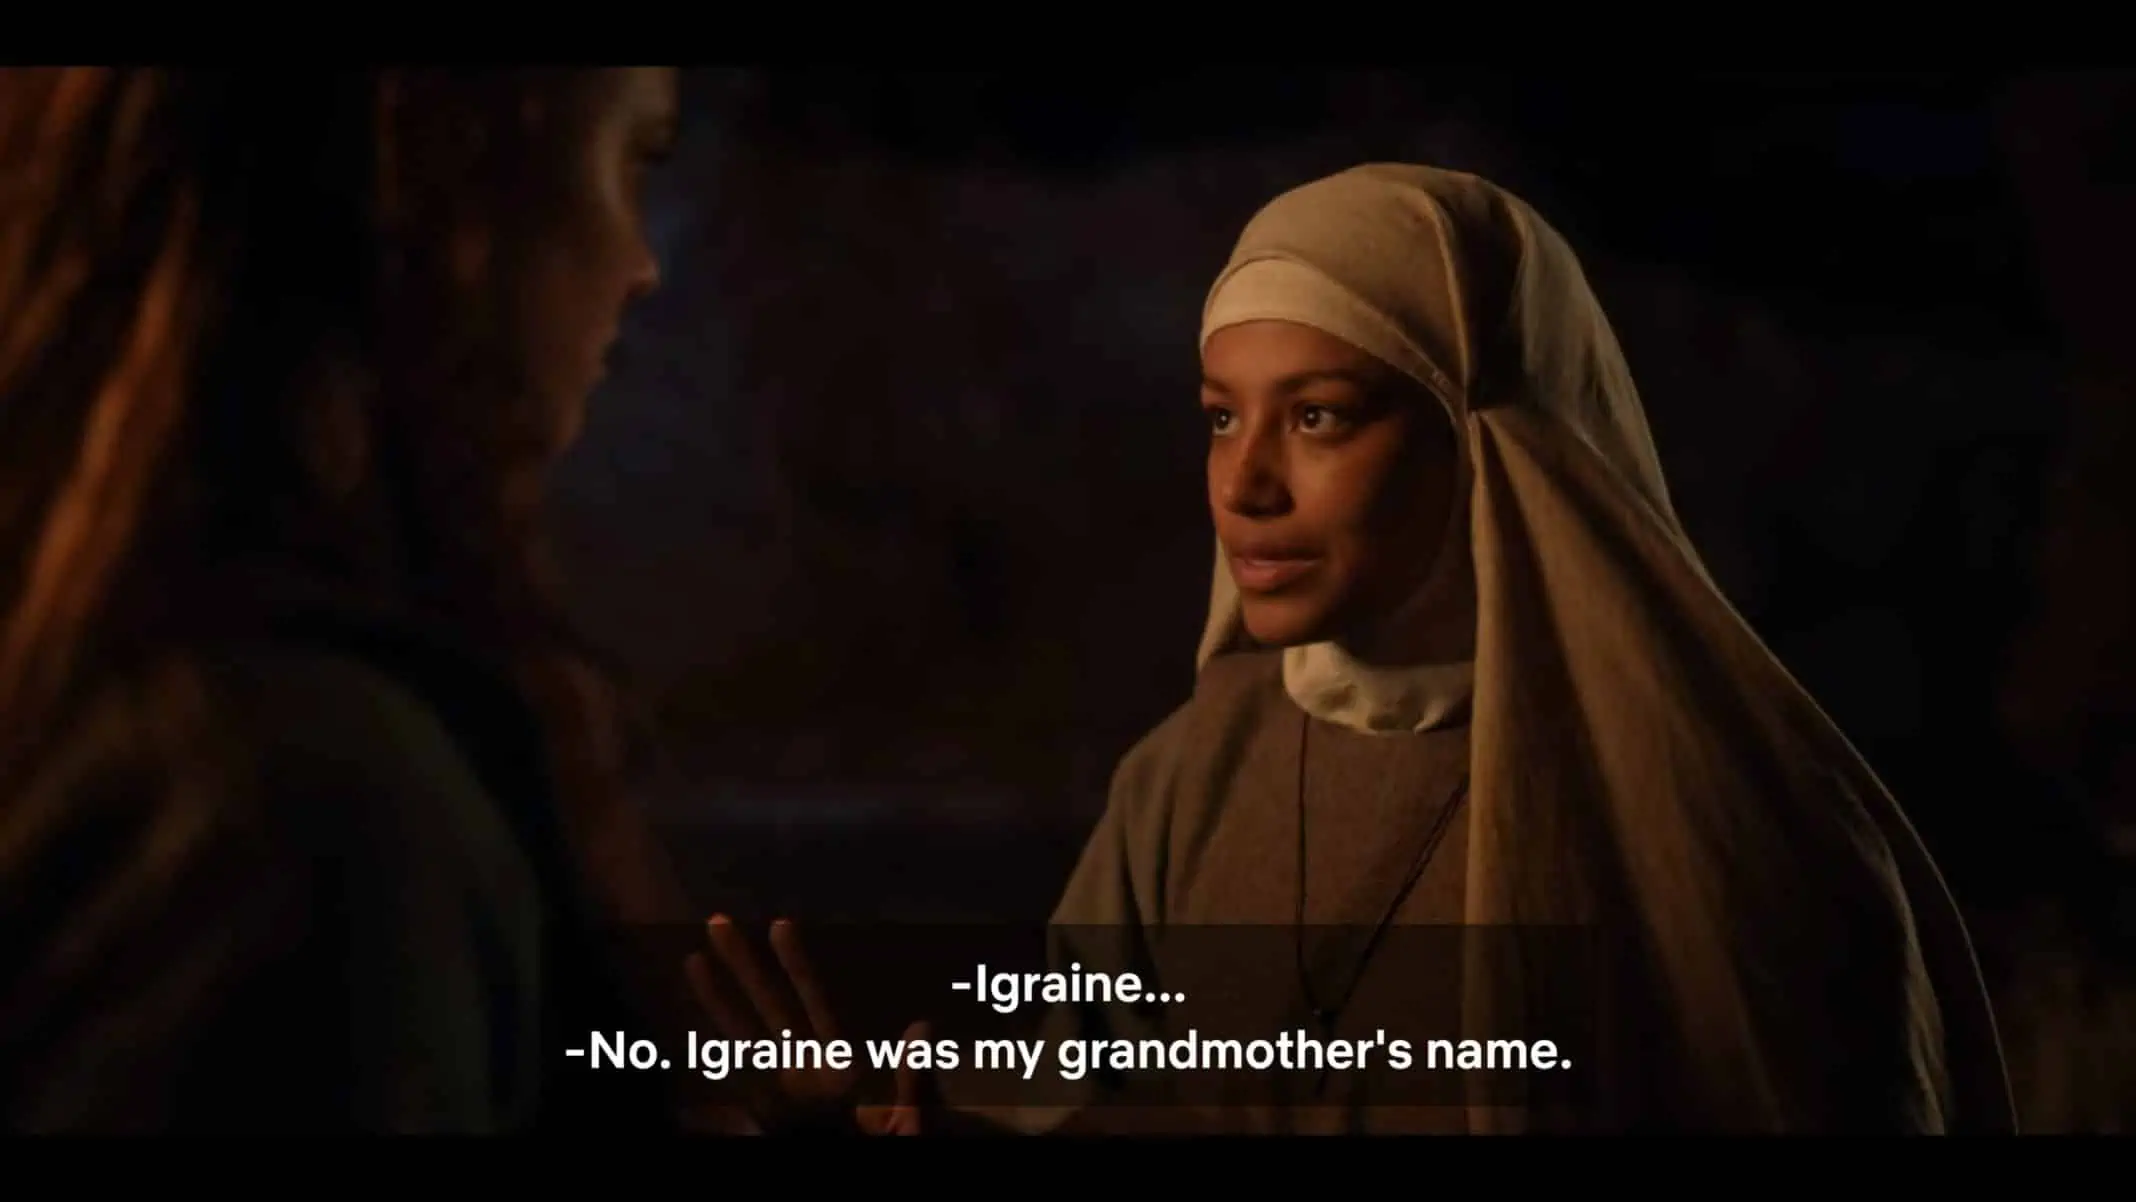 Morgana (Shalom Brune-Franklin) revealing her name isn't Igraine - that's her grandmother's name.